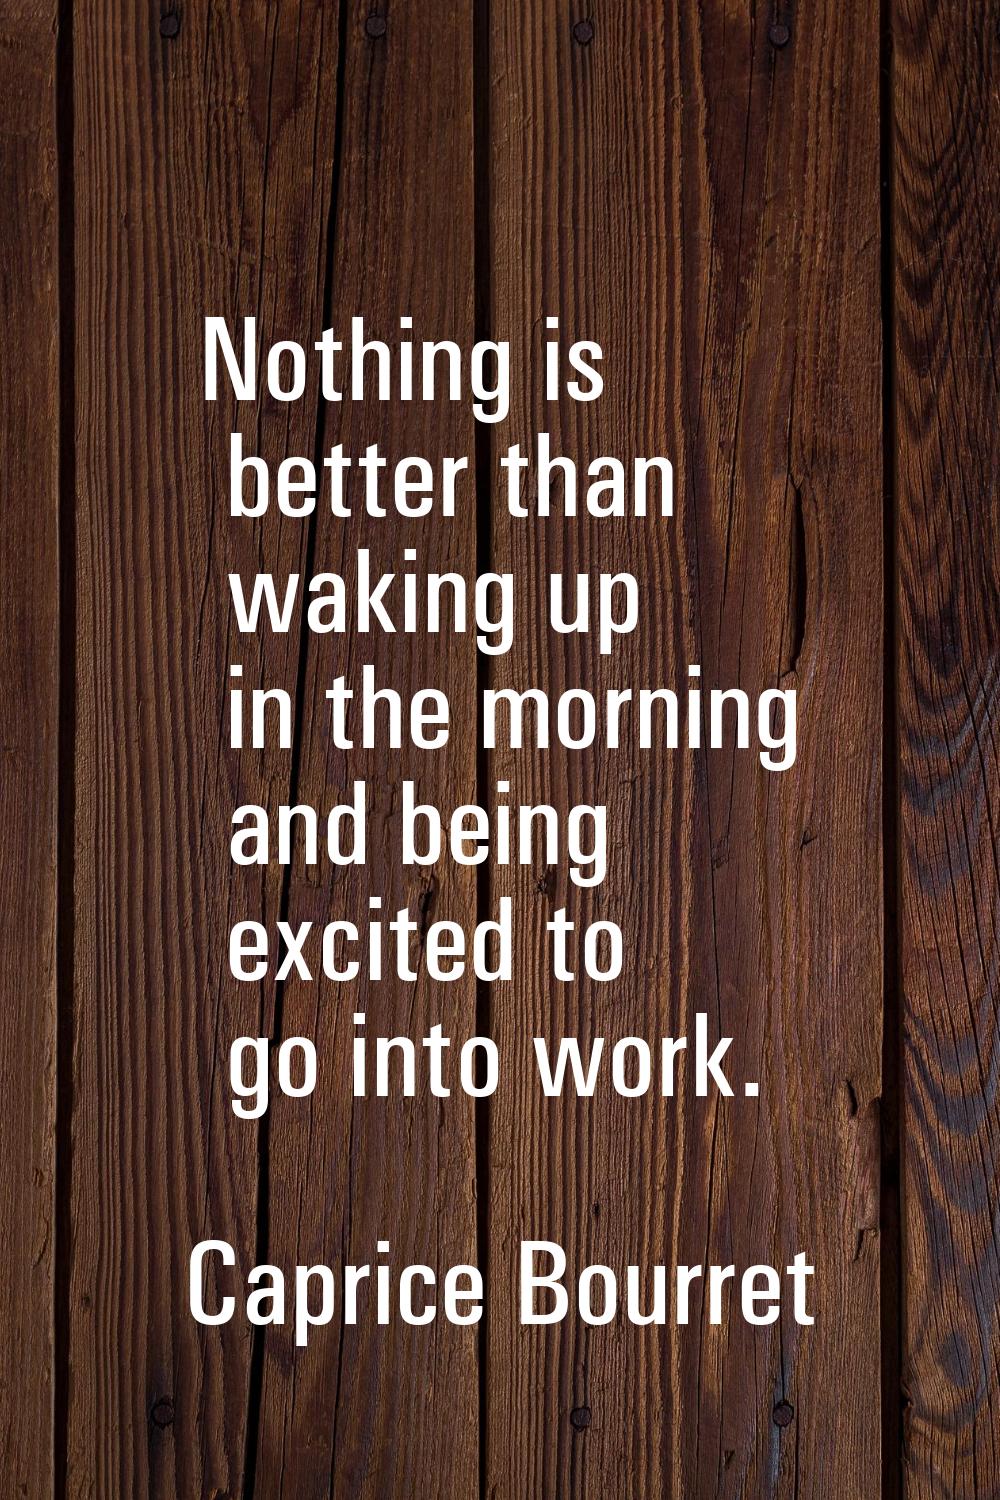 Nothing is better than waking up in the morning and being excited to go into work.